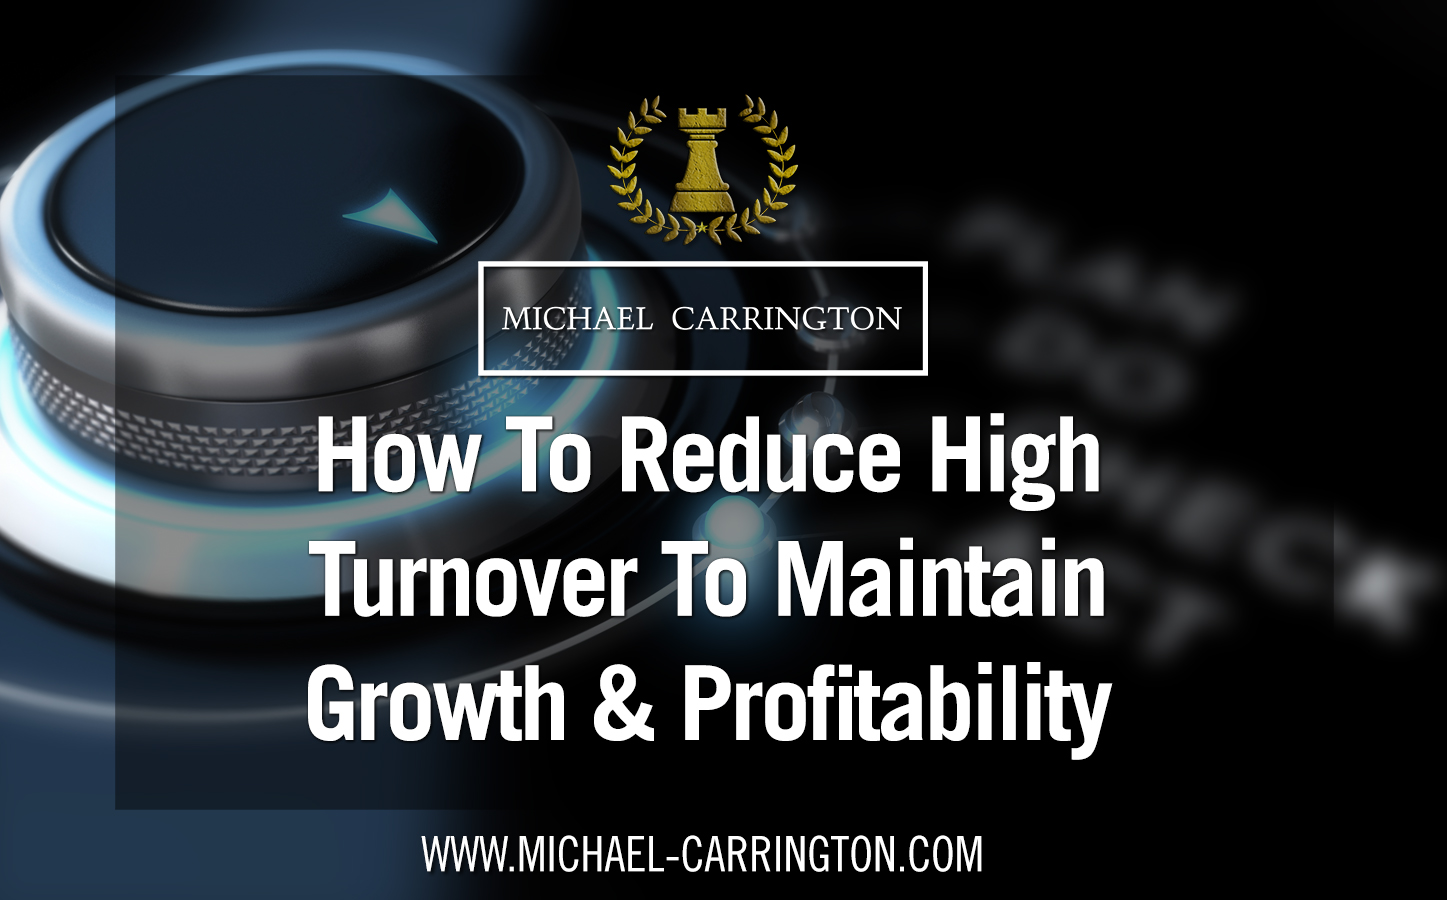 Reducing high turnover is key to improving business growth and profitability